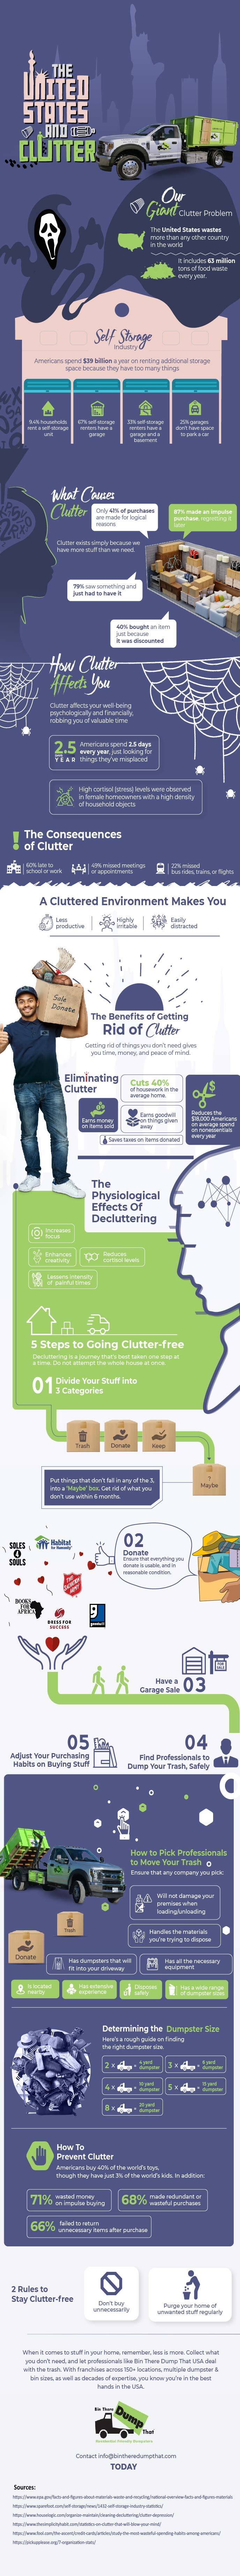 The United States and Clutter Infographic